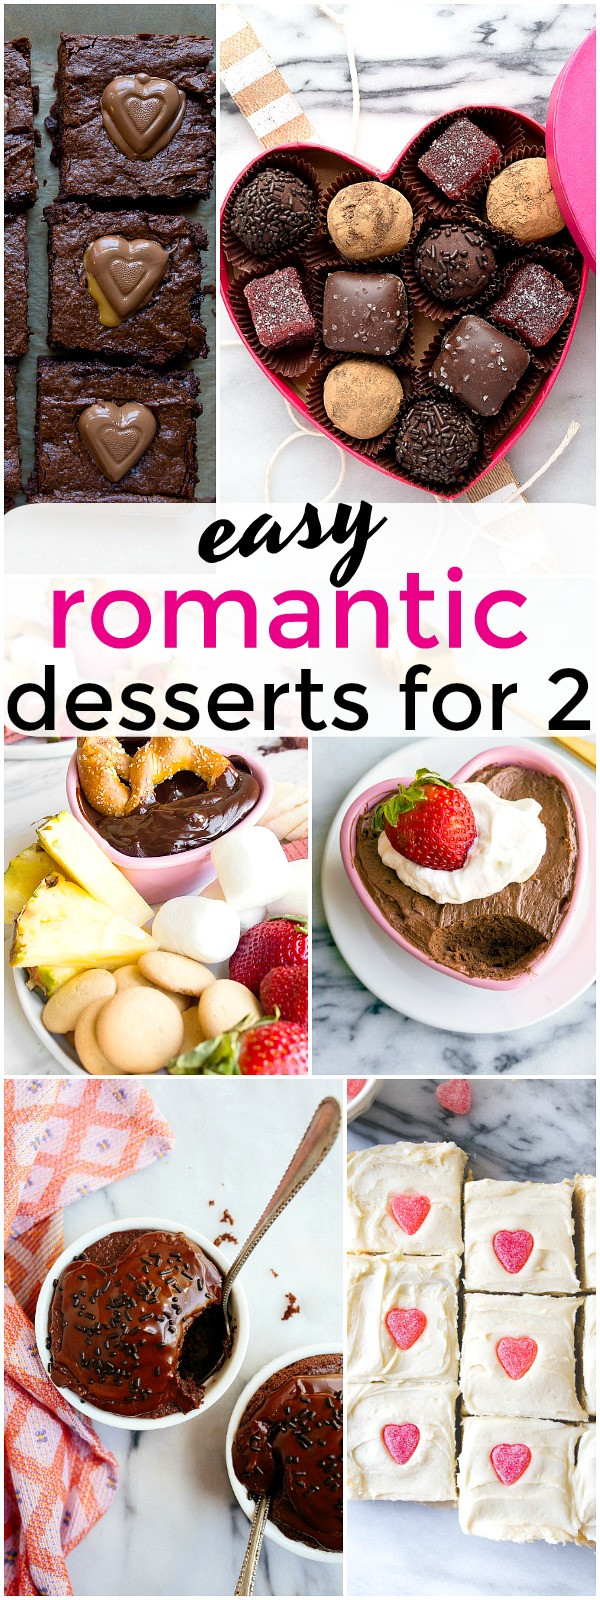 Quick Desserts For Two
 Easy Romantic Desserts for Two People on Valentine s Day